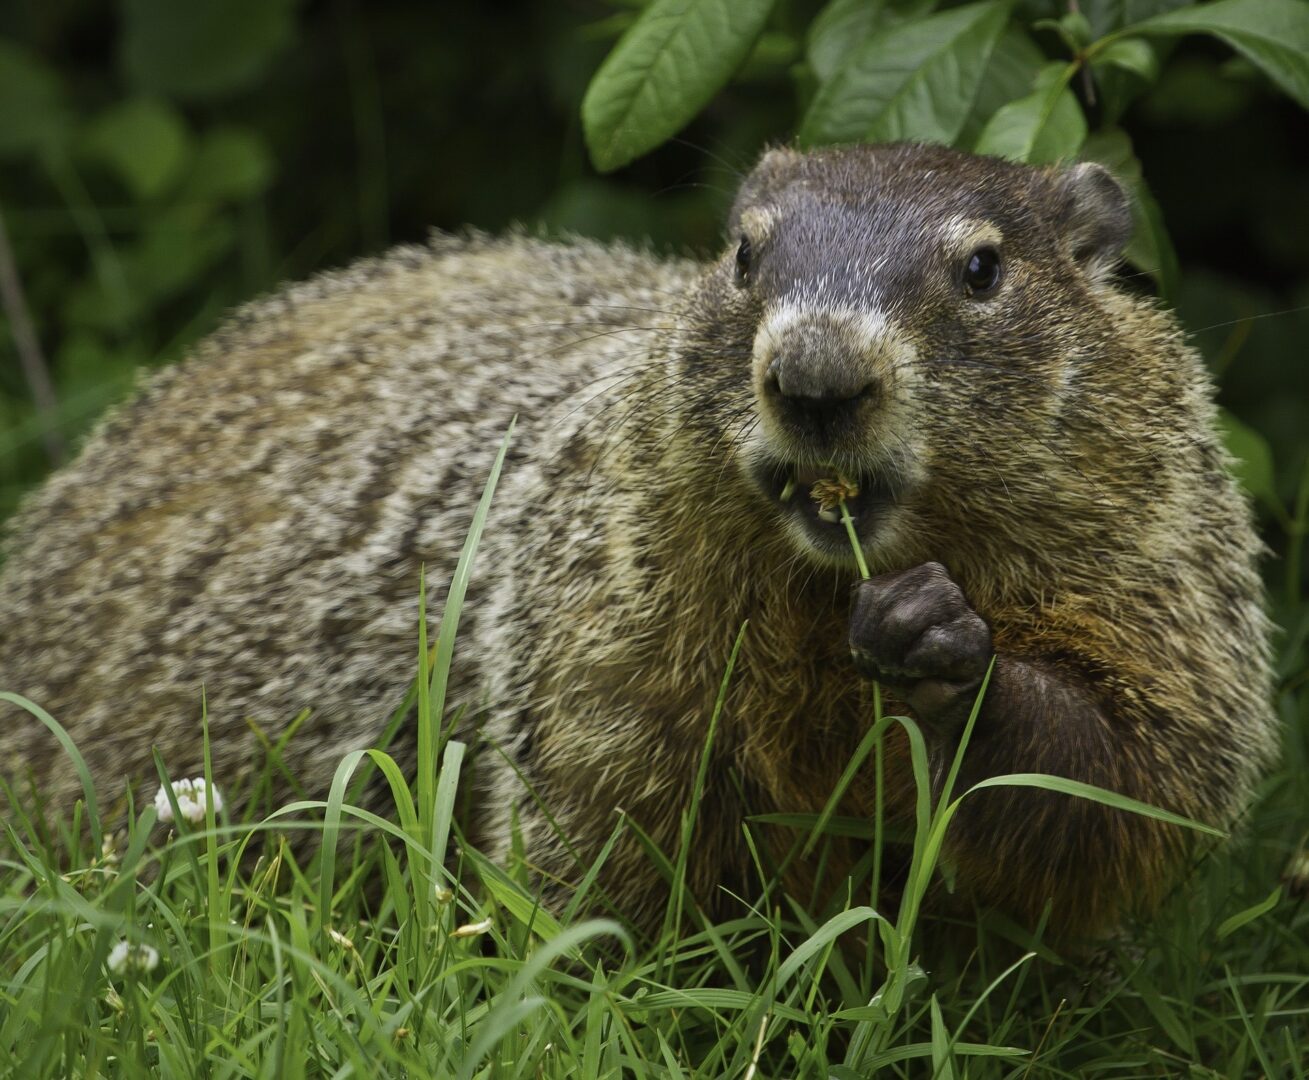 Groundhog chewing on some grass